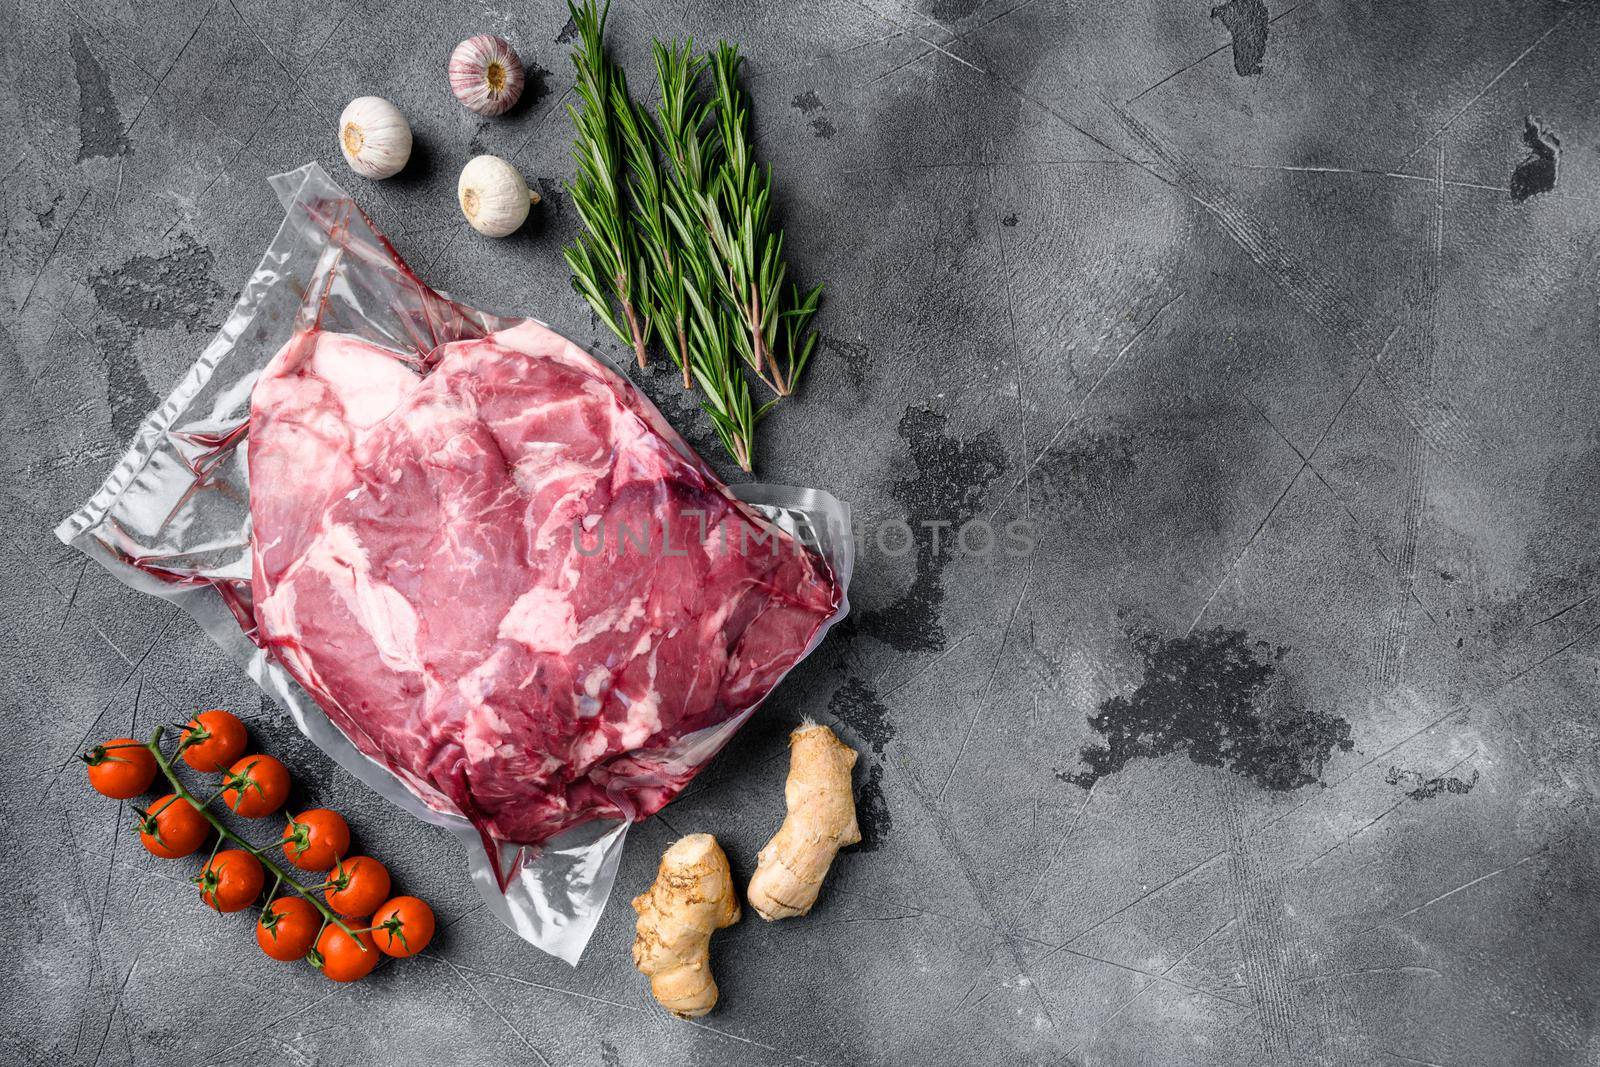 Lamb meat pack ready for cooking, with ingredients and herbs, on gray stone table background, top view flat lay, with copy space for text by Ilianesolenyi